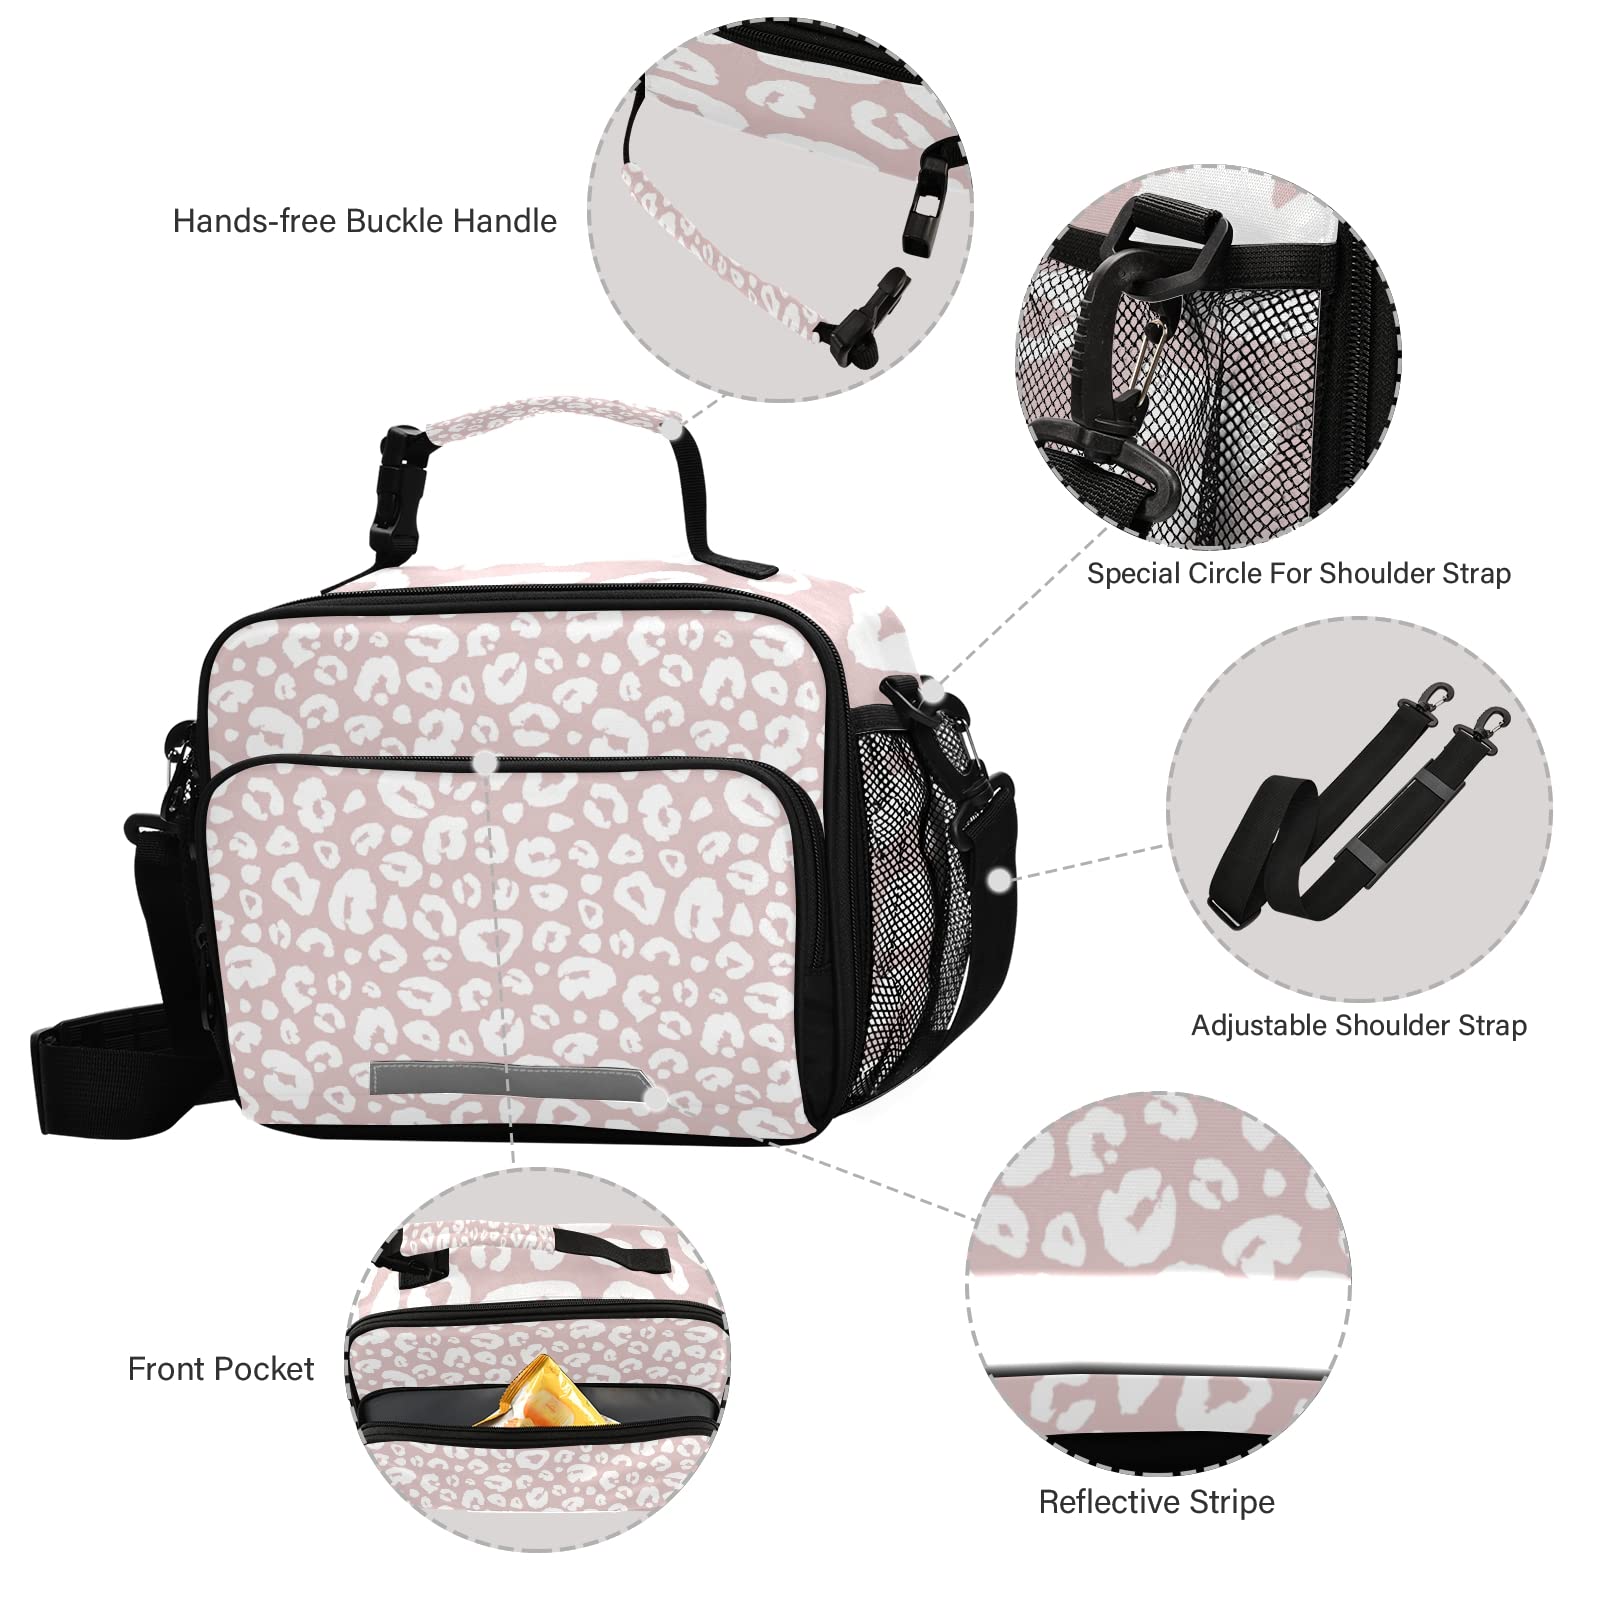 Qilmy Lunch Bag Pink Leopard Insulated Lunch Box Cooler Tote Removable Shoulder Strap Meal Picnic Bags for Outdoor School Travel Office Work